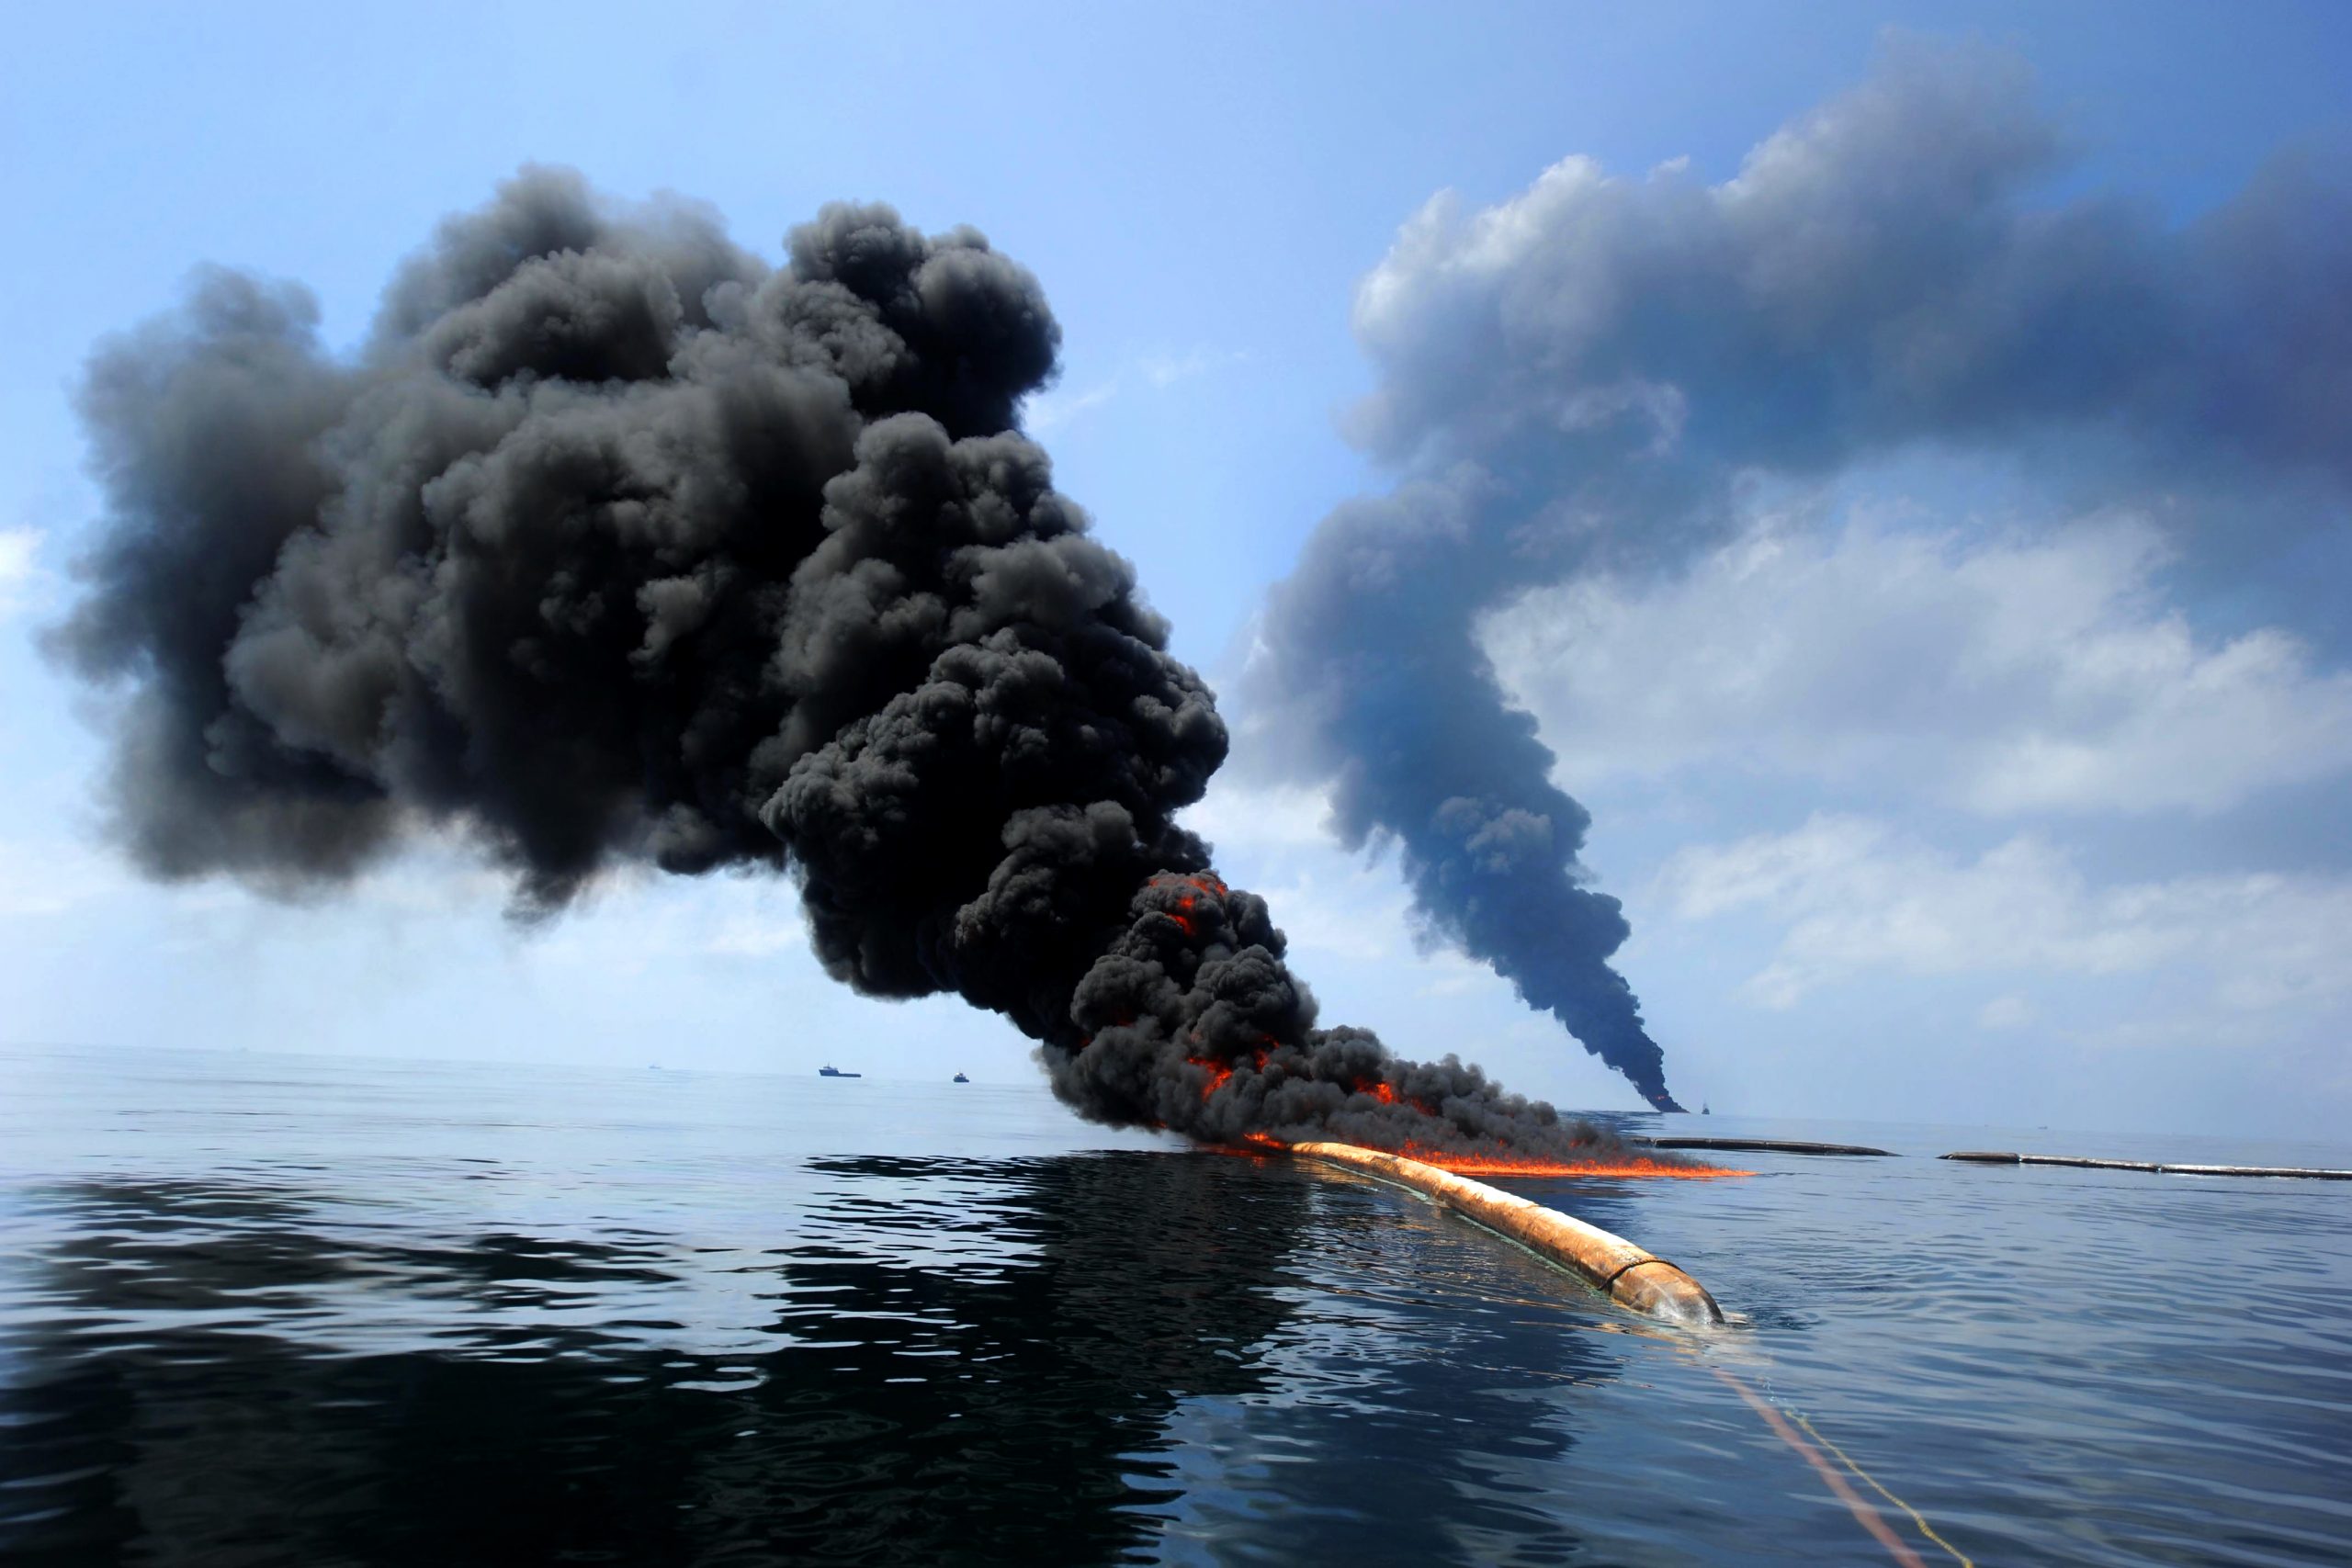 BP fined a record $20.8 billion for oil spill disaster